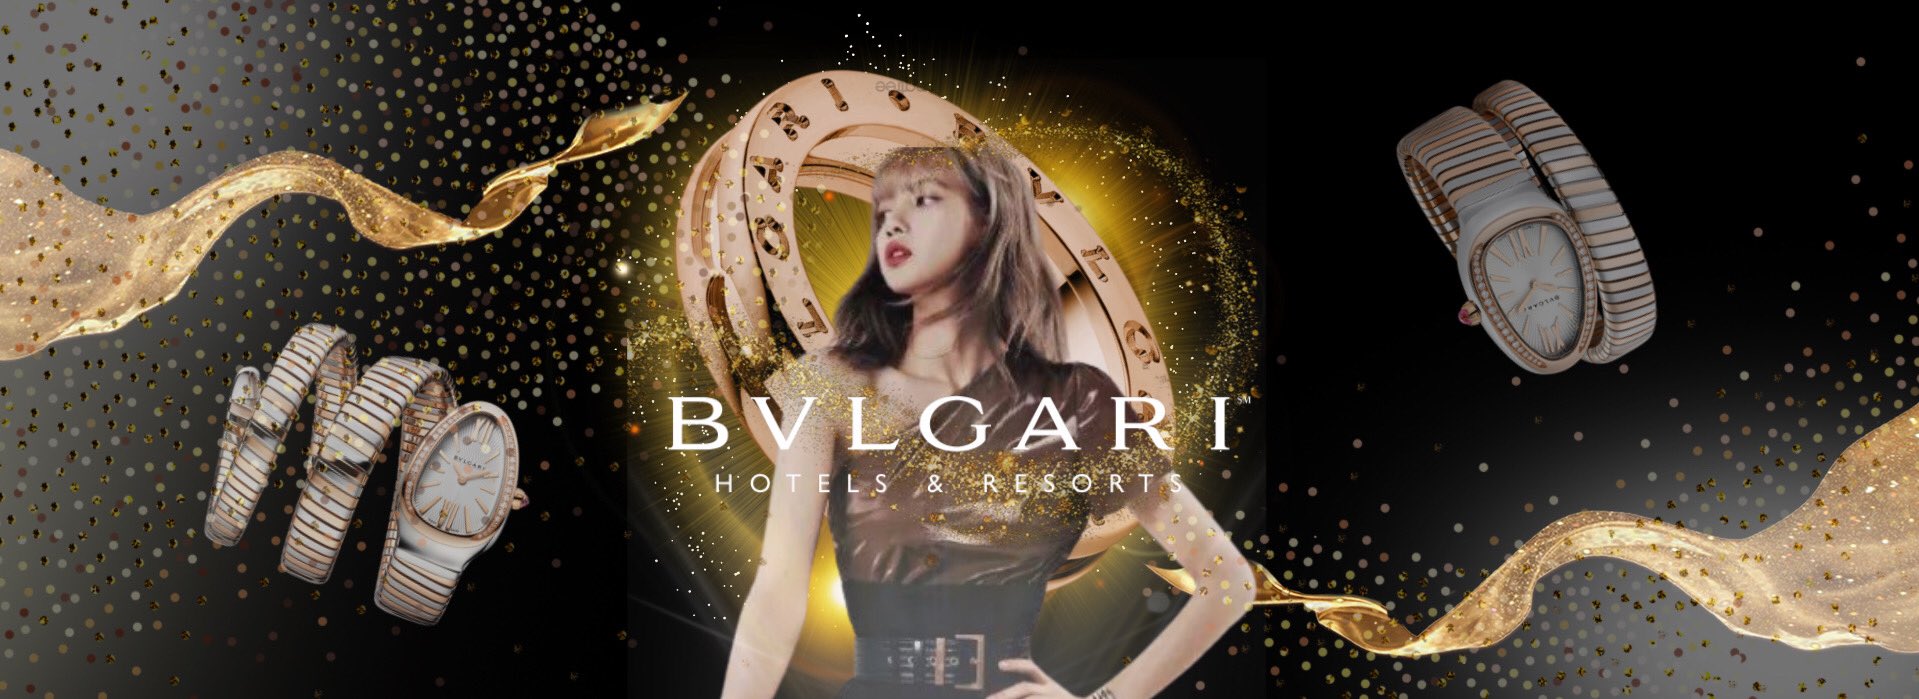 Steffi M Rest The Trademark Is Usually Written Bvlgari In The Classical Latin Alphabet And It Is Derived From The Surname Of The Company S Founder Sotirios Voulgaris 블랙핑크 리사 최고의